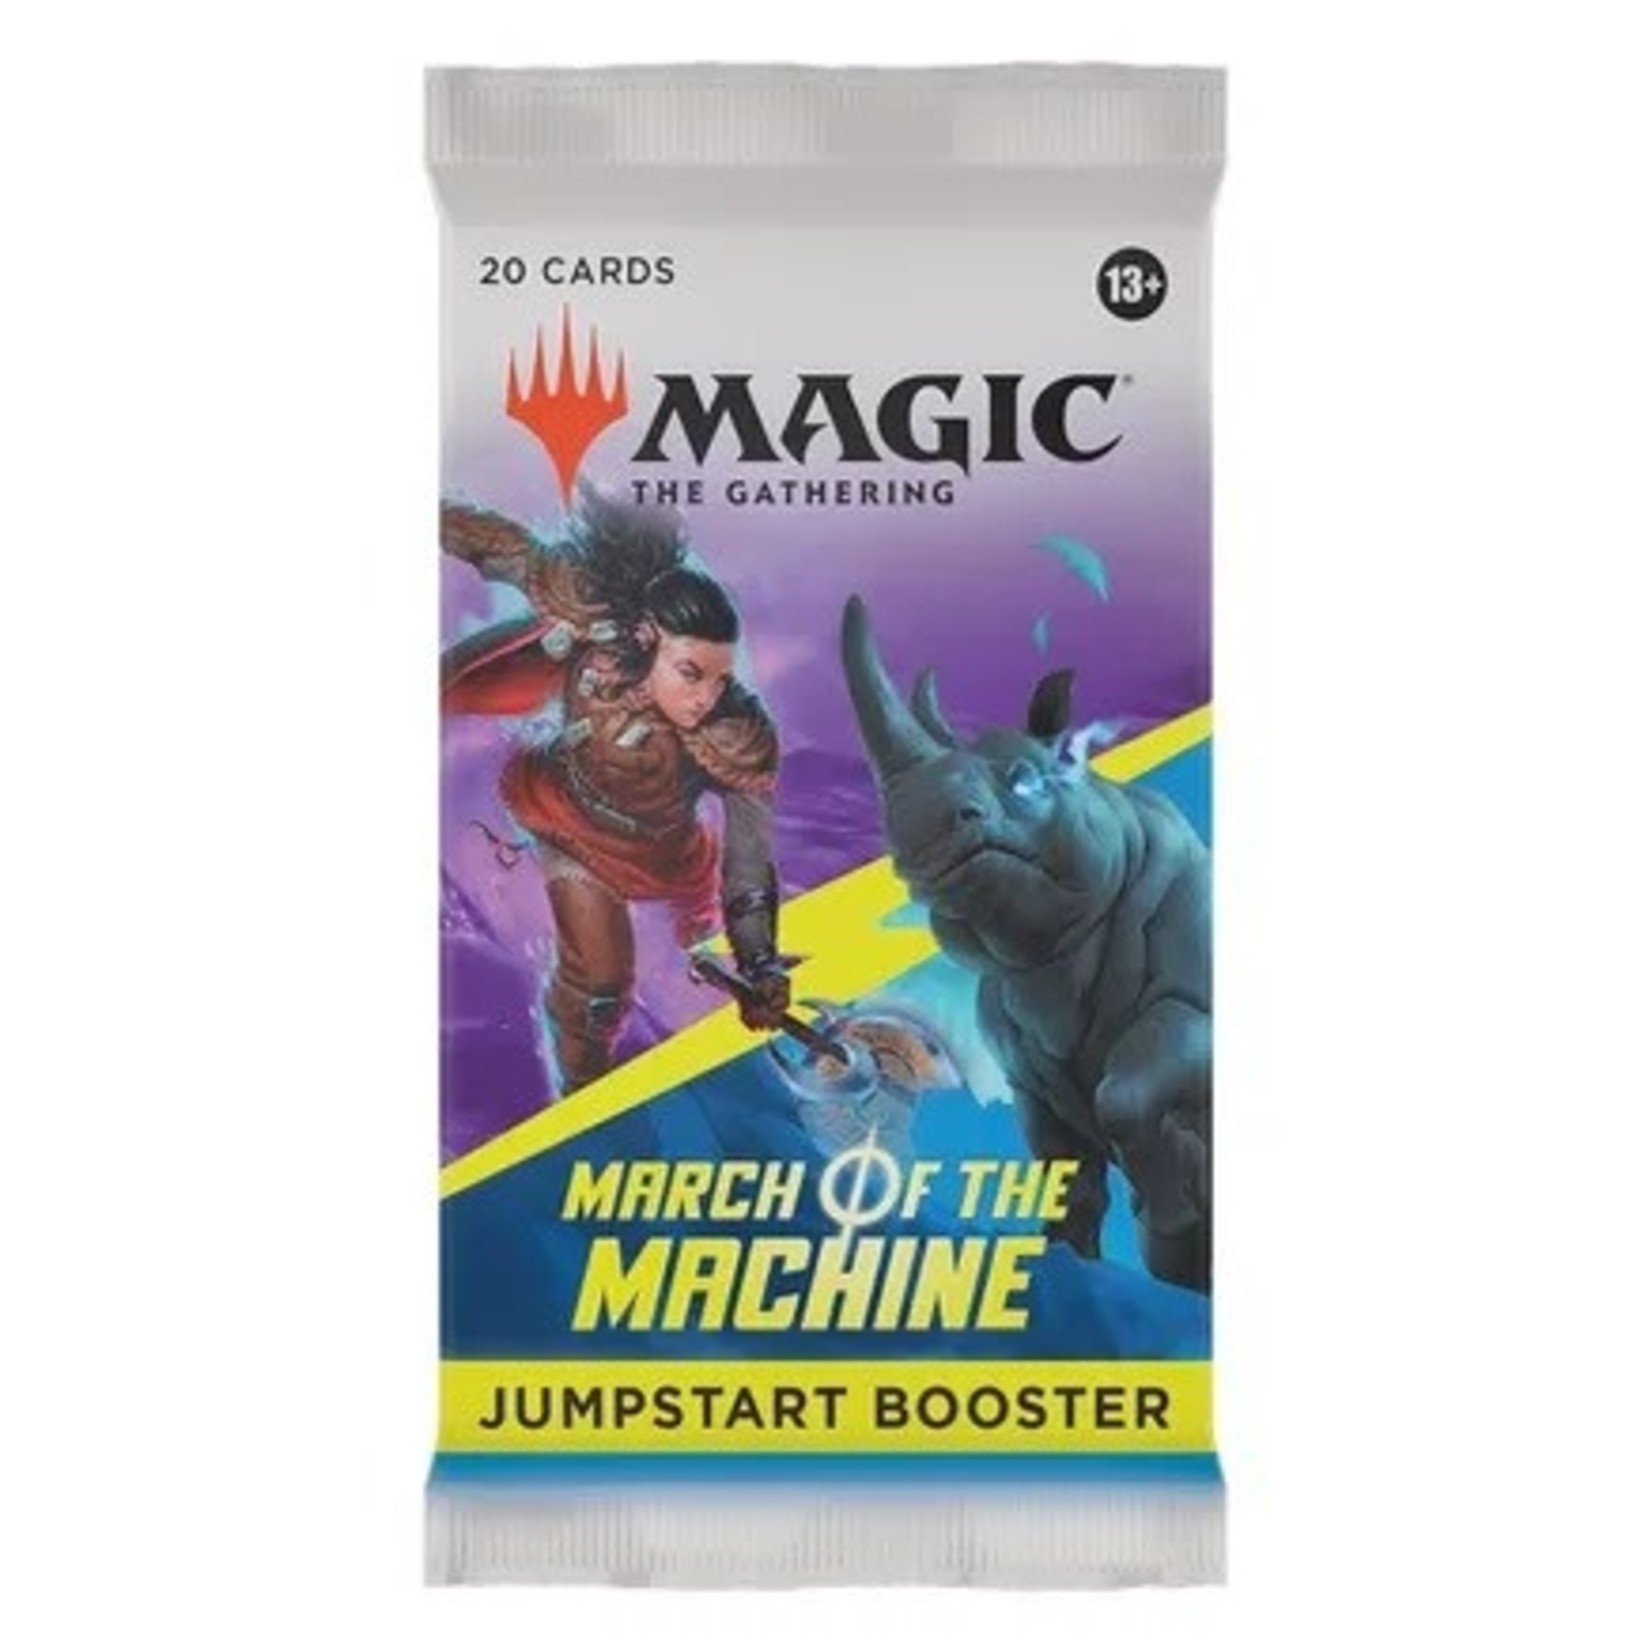 Magic: The Gathering March of the Machine Jumpstart Pack